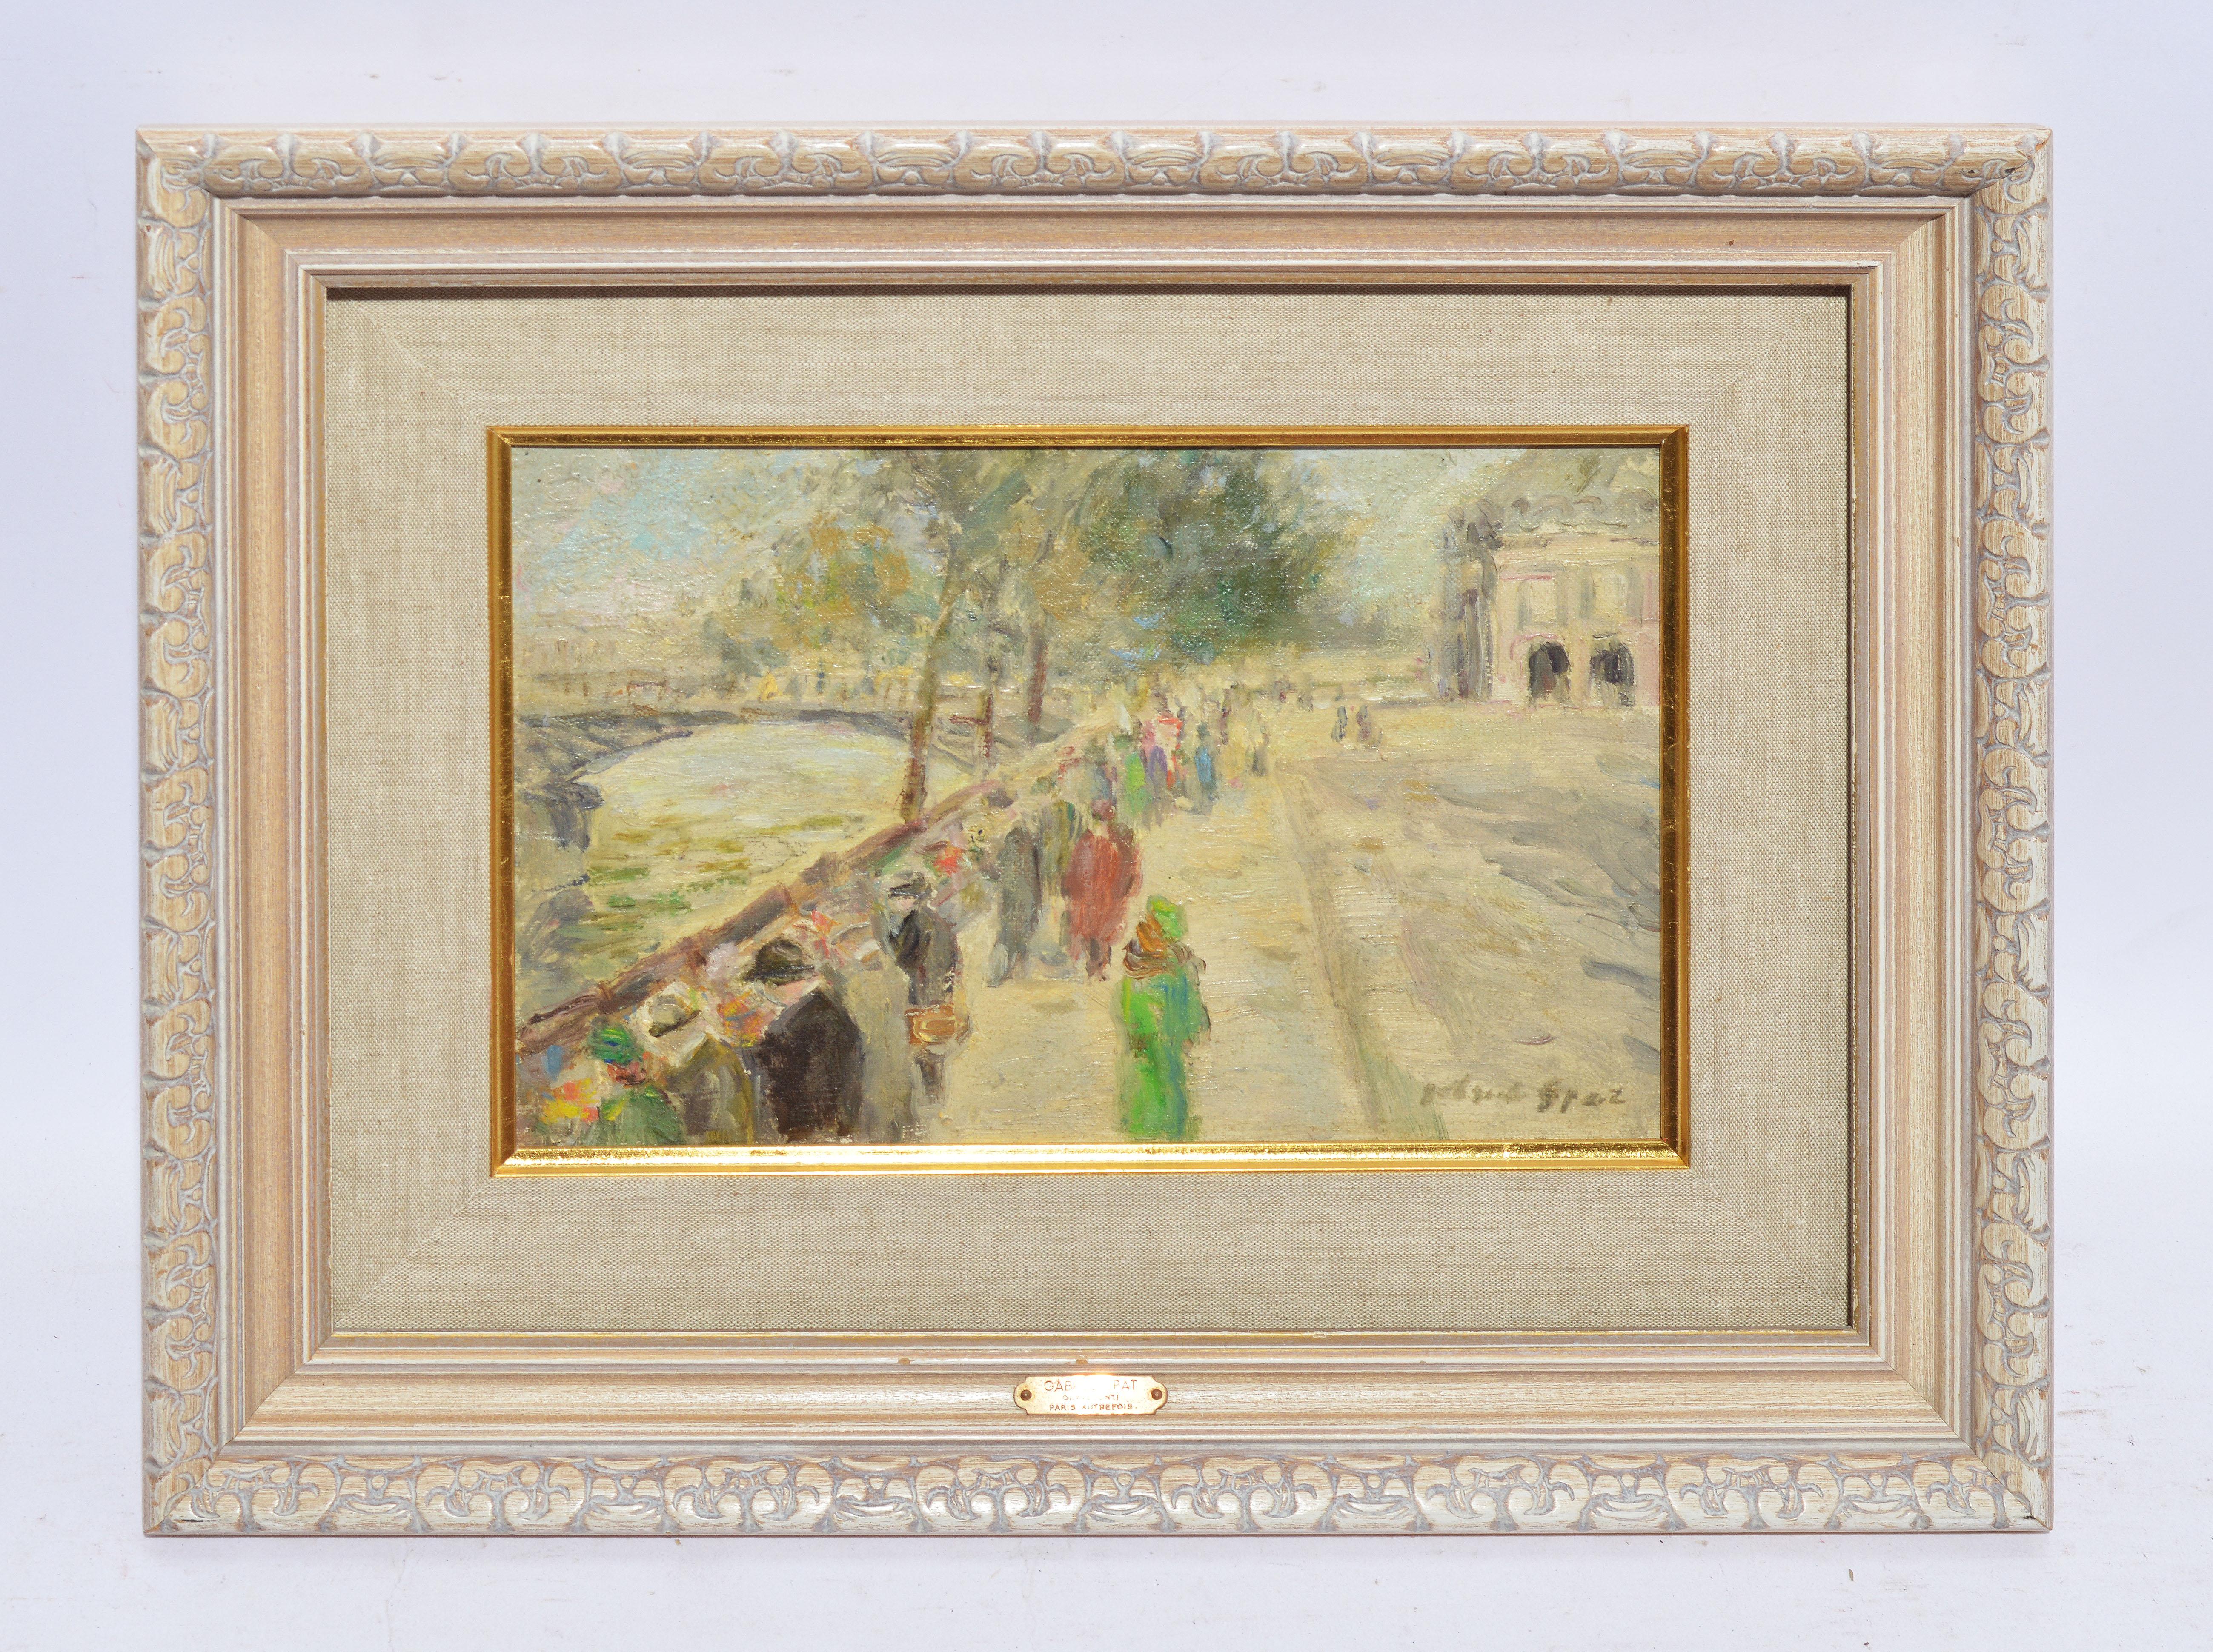 Vintage impressionist cityscape painting of Paris by Gabriel Spat  (1890 - 1967).  Oil on canvasboard, circa 1920.  Signed.  Displayed in a giltwood frame.  Image, 9.5